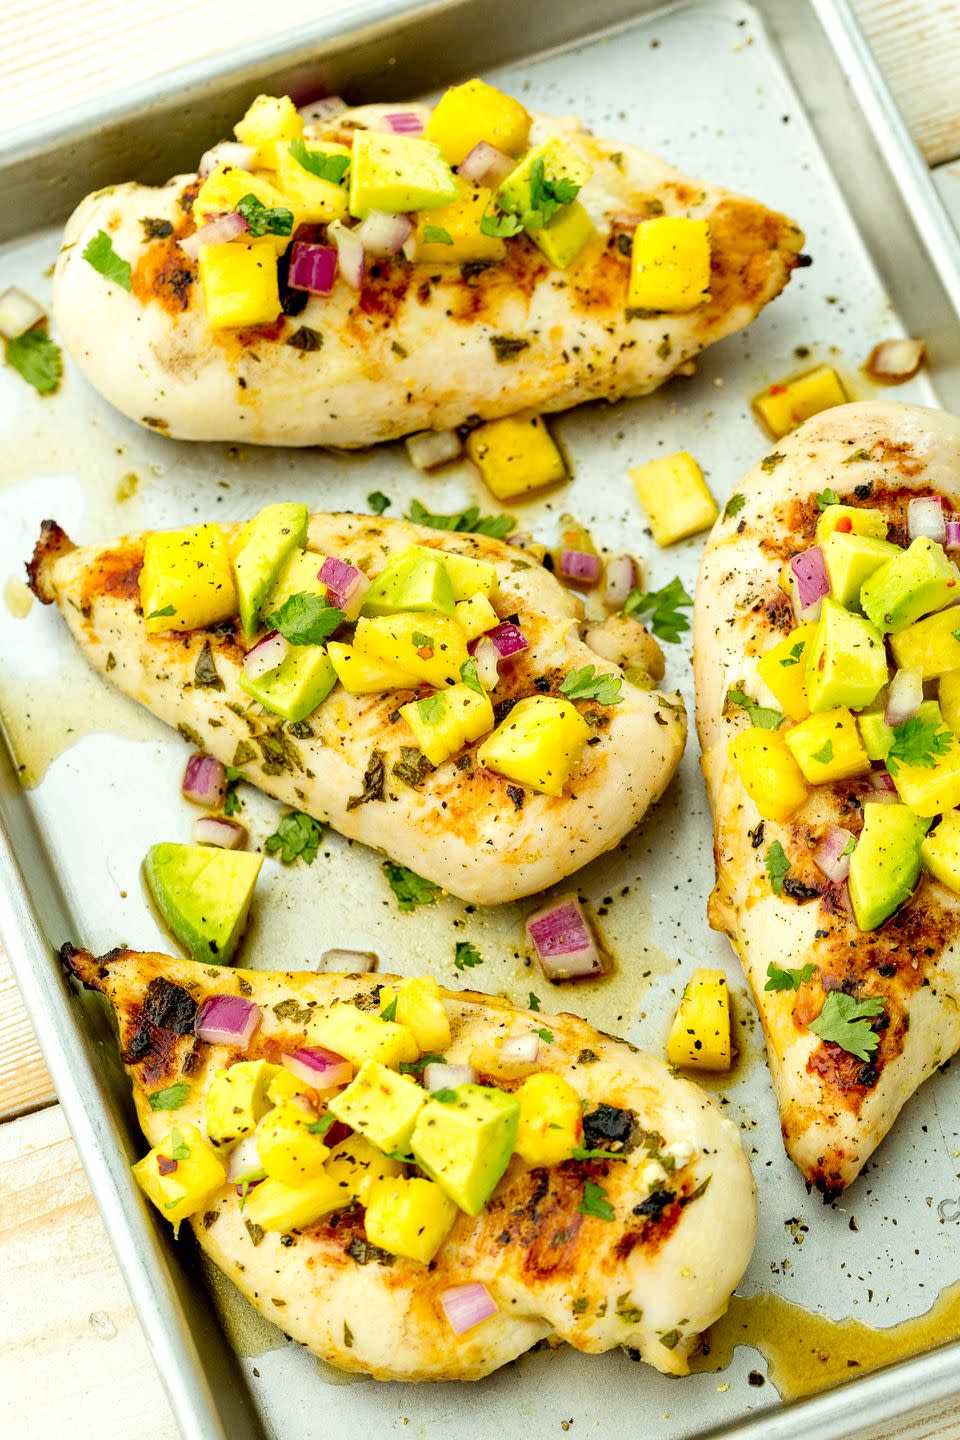 Grilled Honey-Lime Chicken with Pineapple Salsa